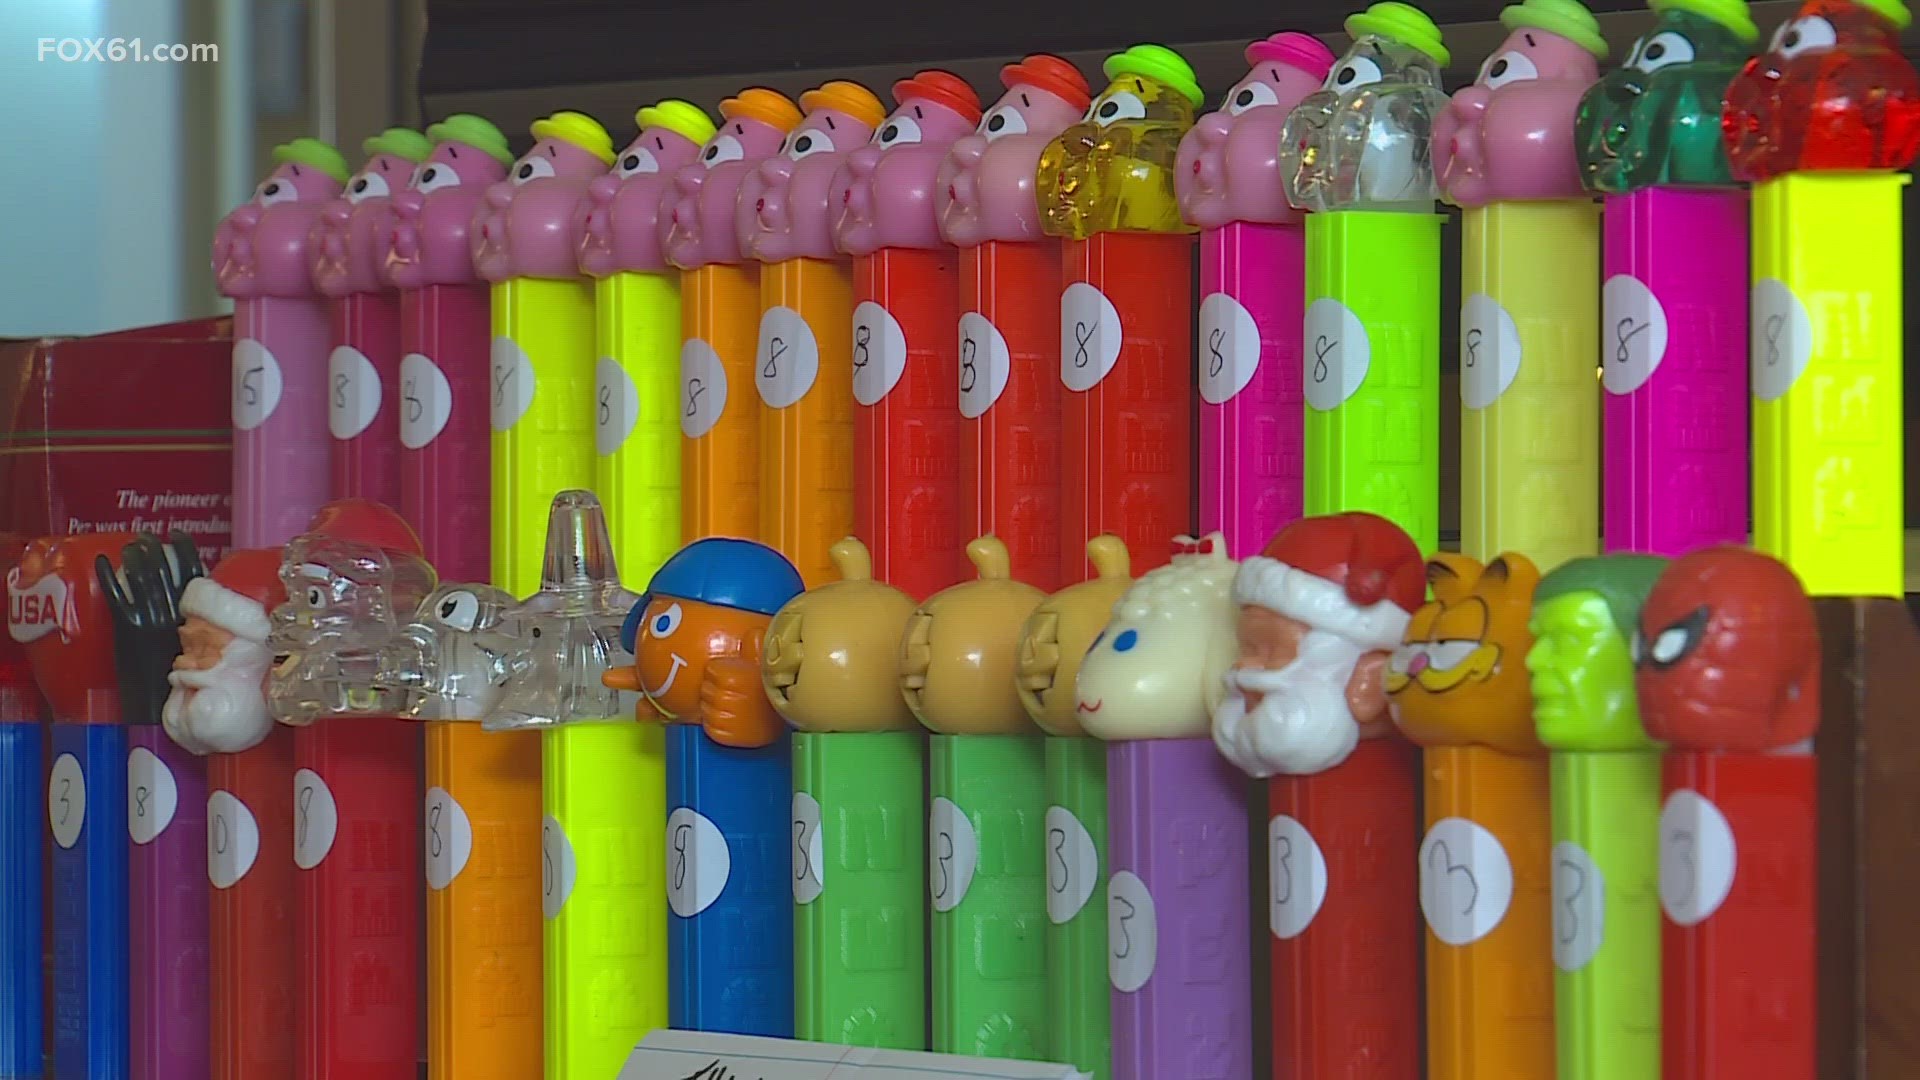 For collectors, known as “Pez Heads”, being close to the company makes the show extra special.